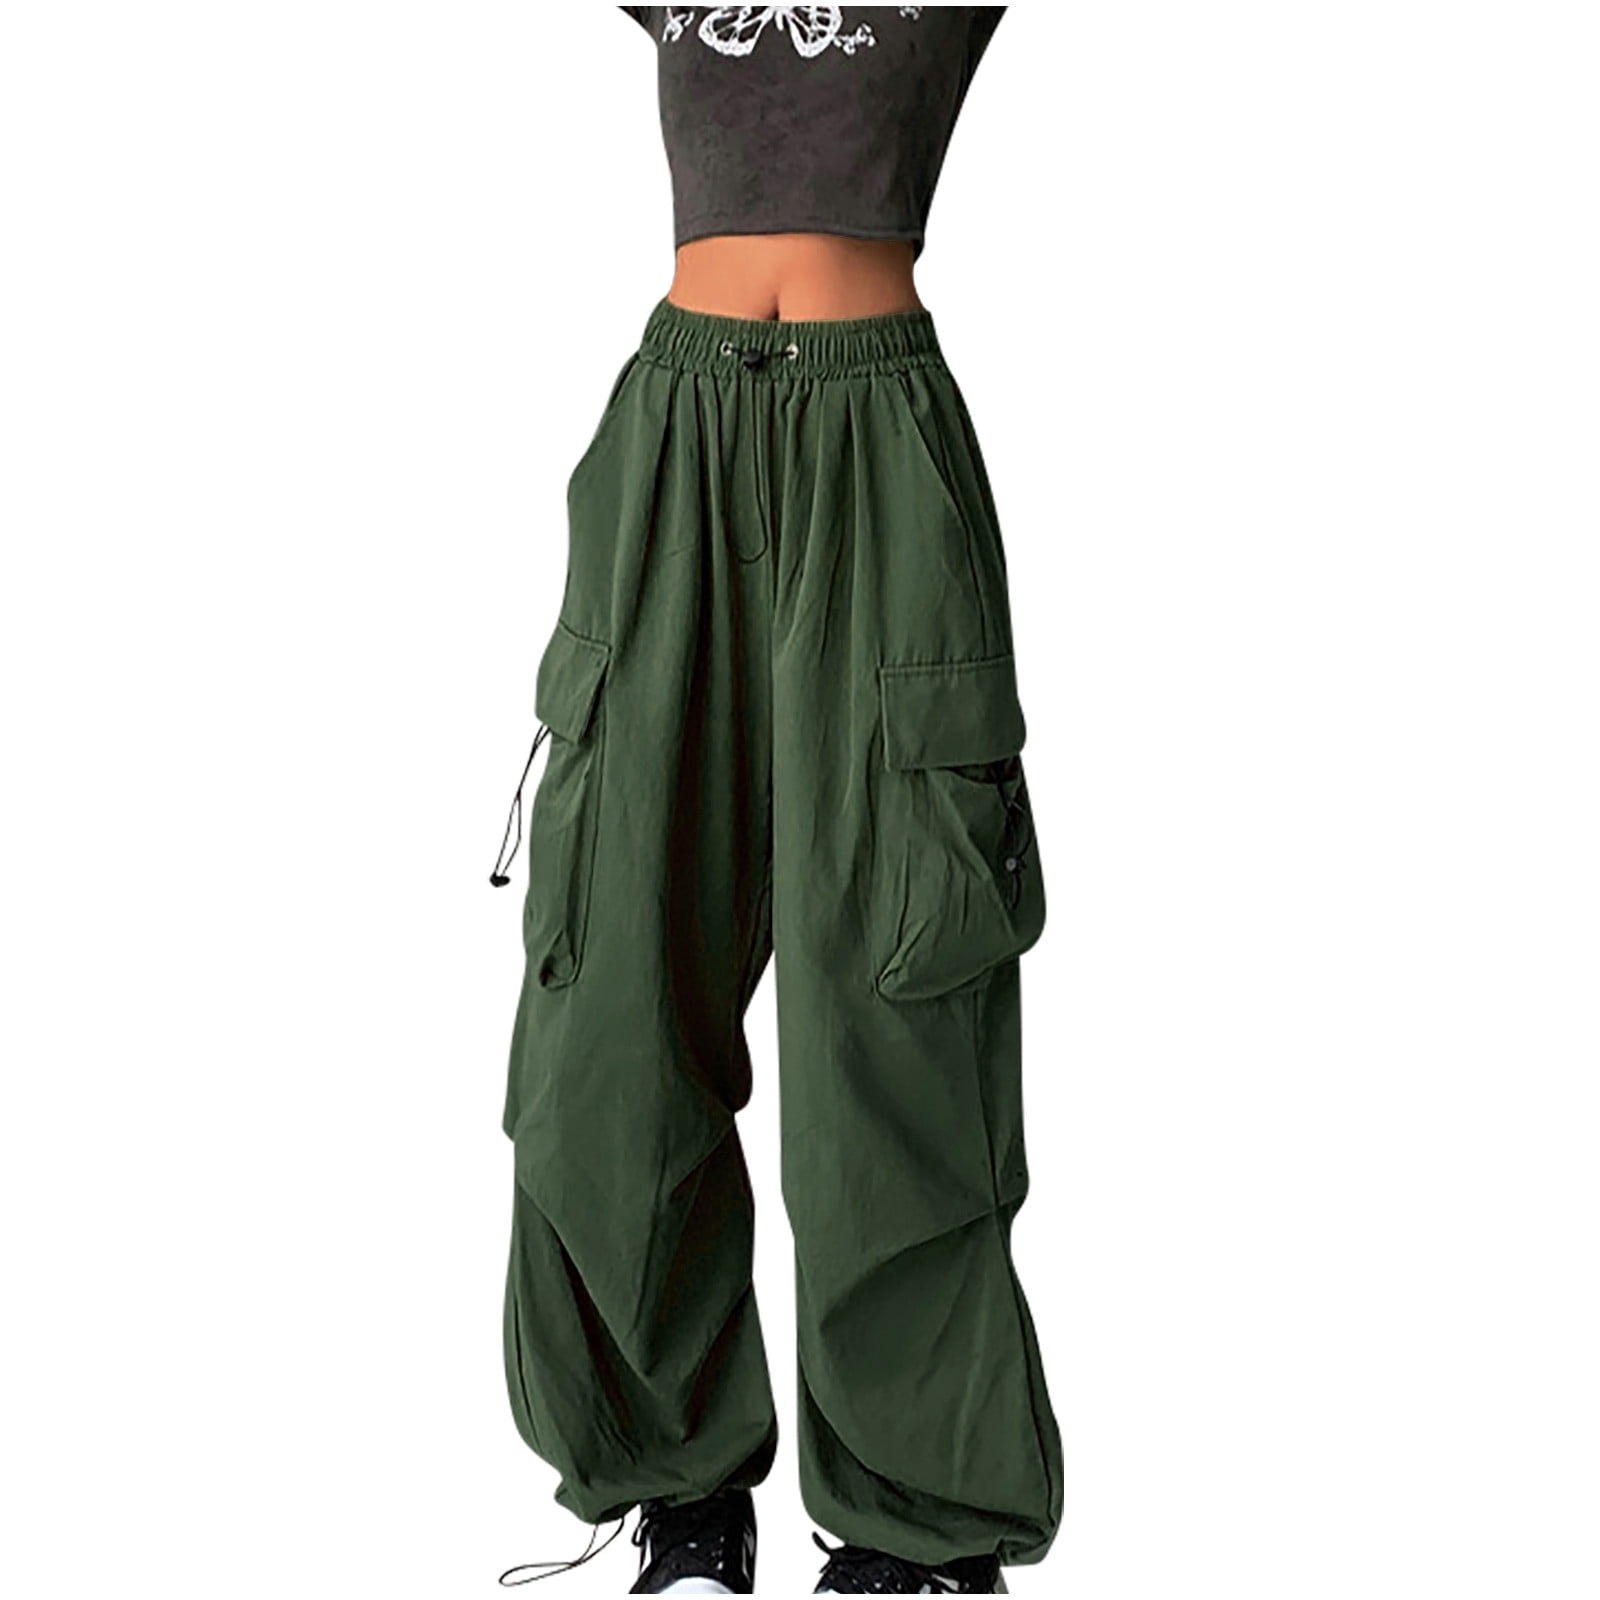 Jwzuy Women's Tie Dye Camo Cargo Pants High Waisted Straight Leg Pants with Pockets Camouflage L, Size: Large, Green